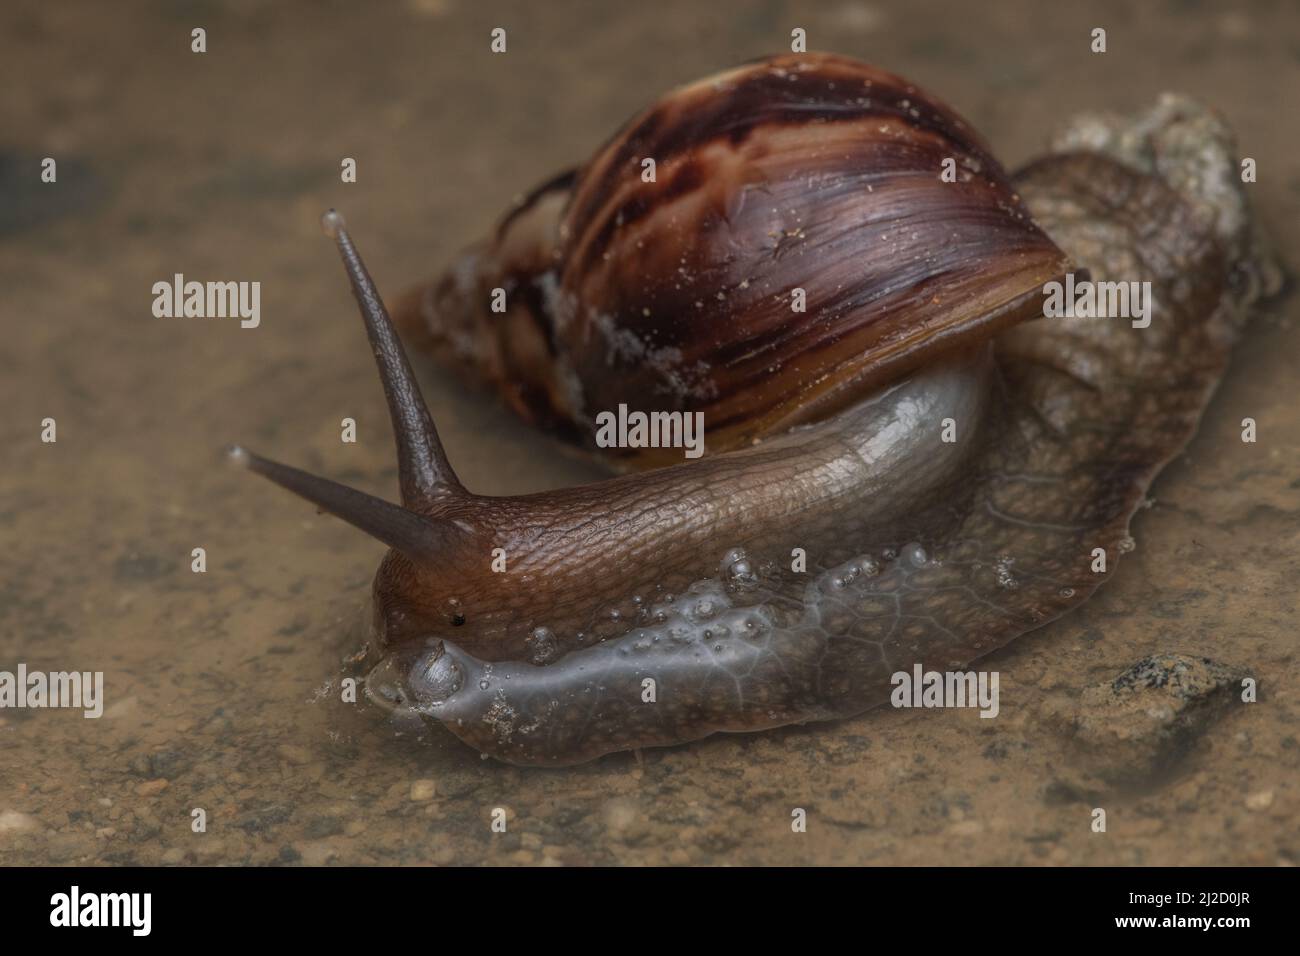 A Giant African land snail (Lissachatina fulica) from the dry forest of Ecuador, an invasive species widespread across many areas. Stock Photo